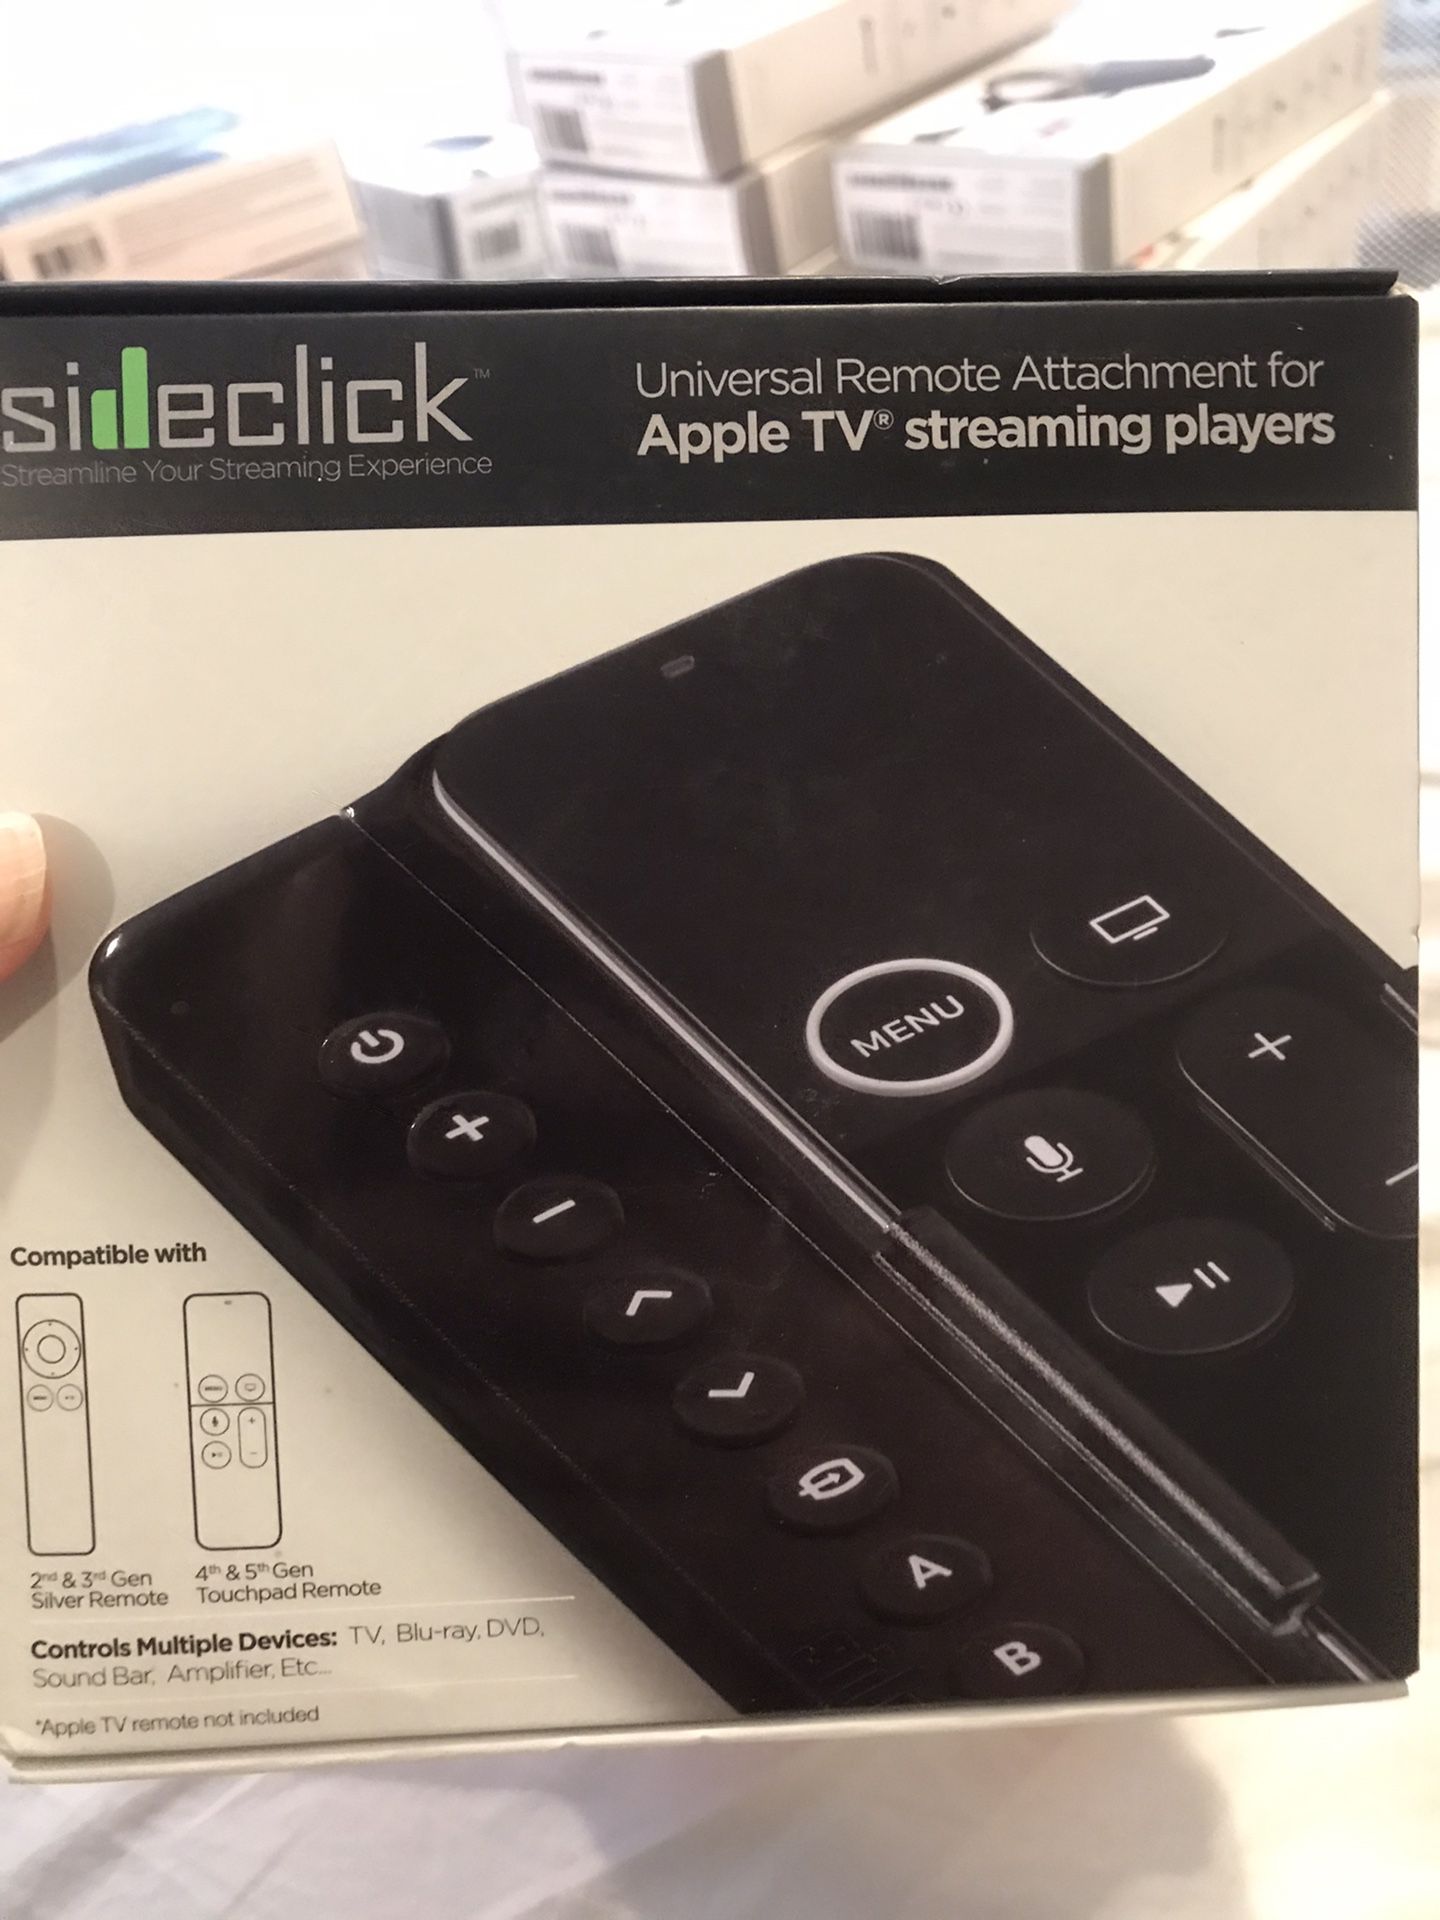 New Sideclick - Universal Remote Attachment for Apple TV 2nd, 3rd, 4th, and 5th 4...